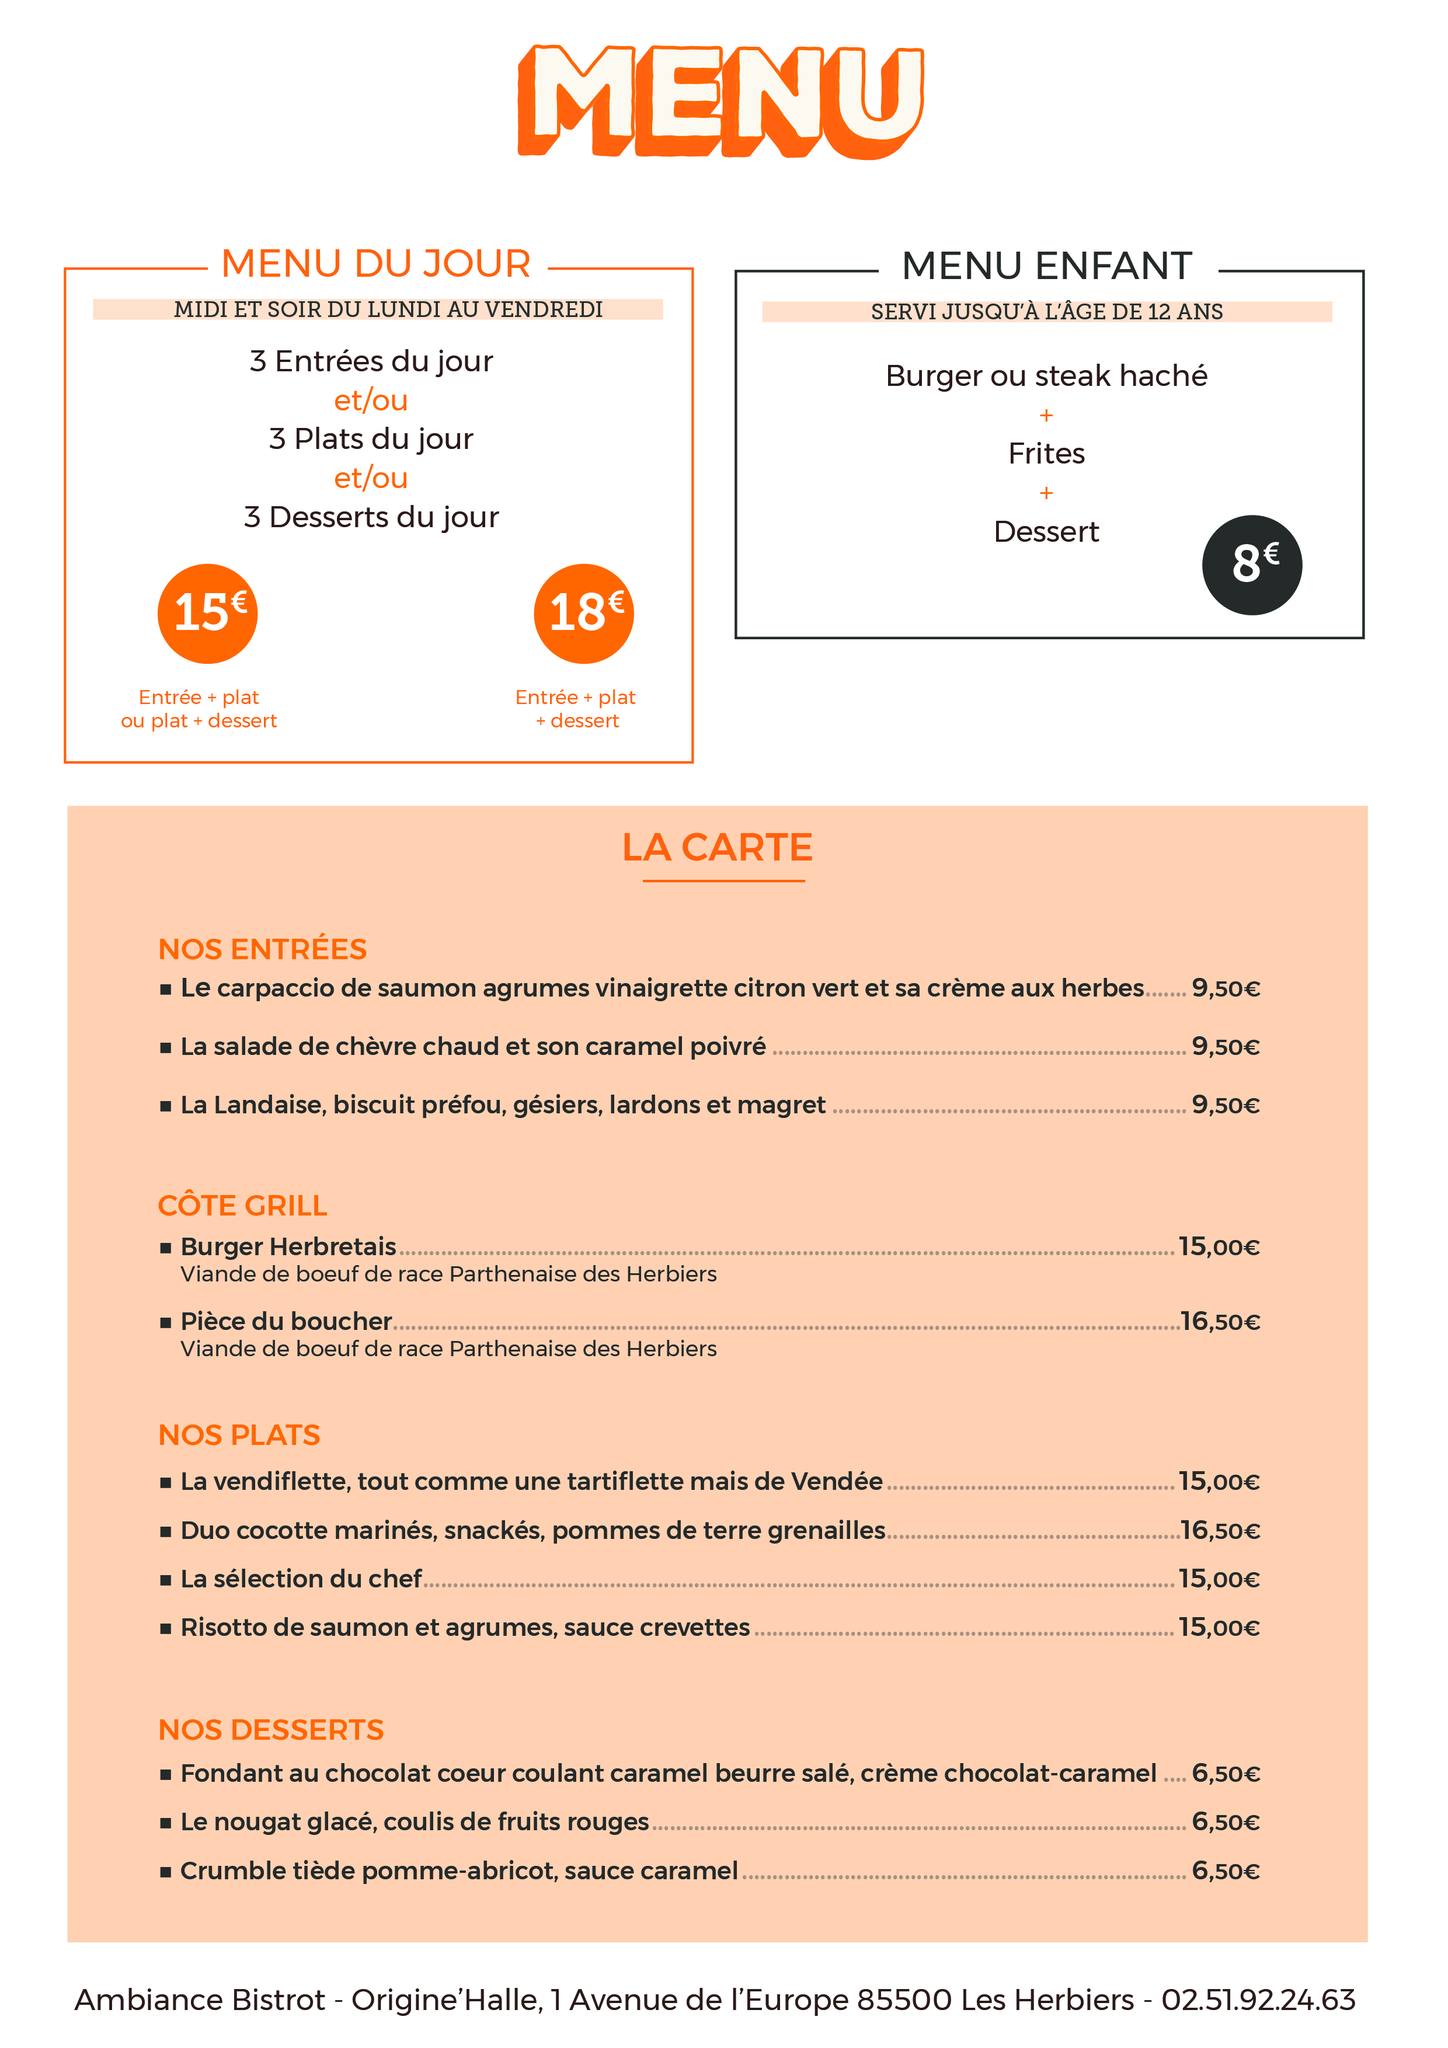 carte ambiance bistrot